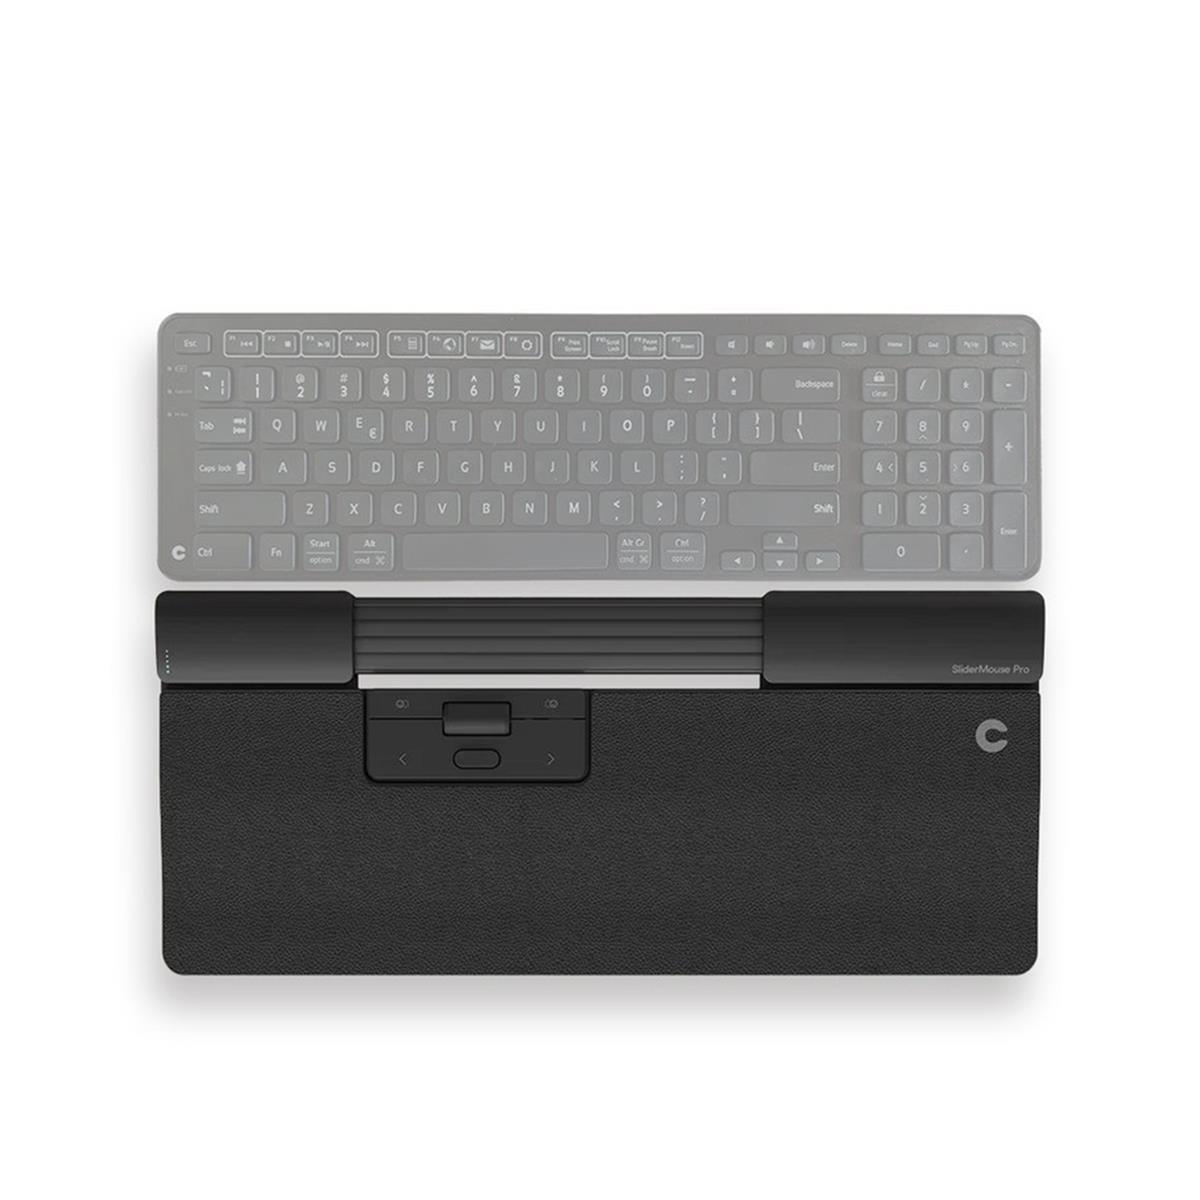 Image of Contour Design Wired SliderMouse Pro with Vegan Leather Wrist Rest Regular